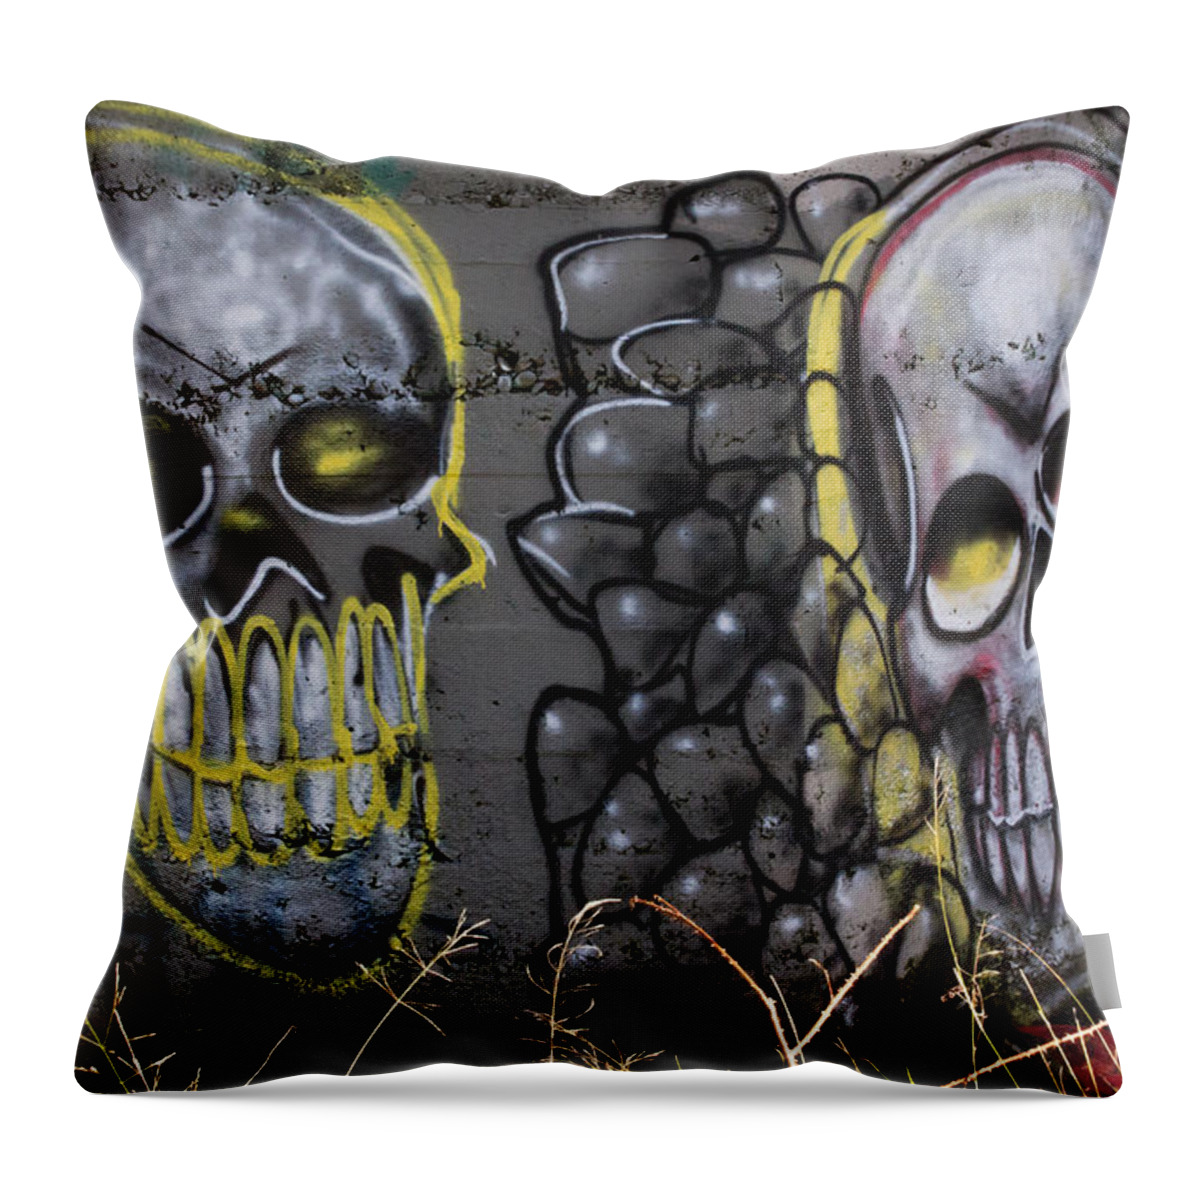 Graffiti Throw Pillow featuring the photograph Say Cheese by Marnie Patchett